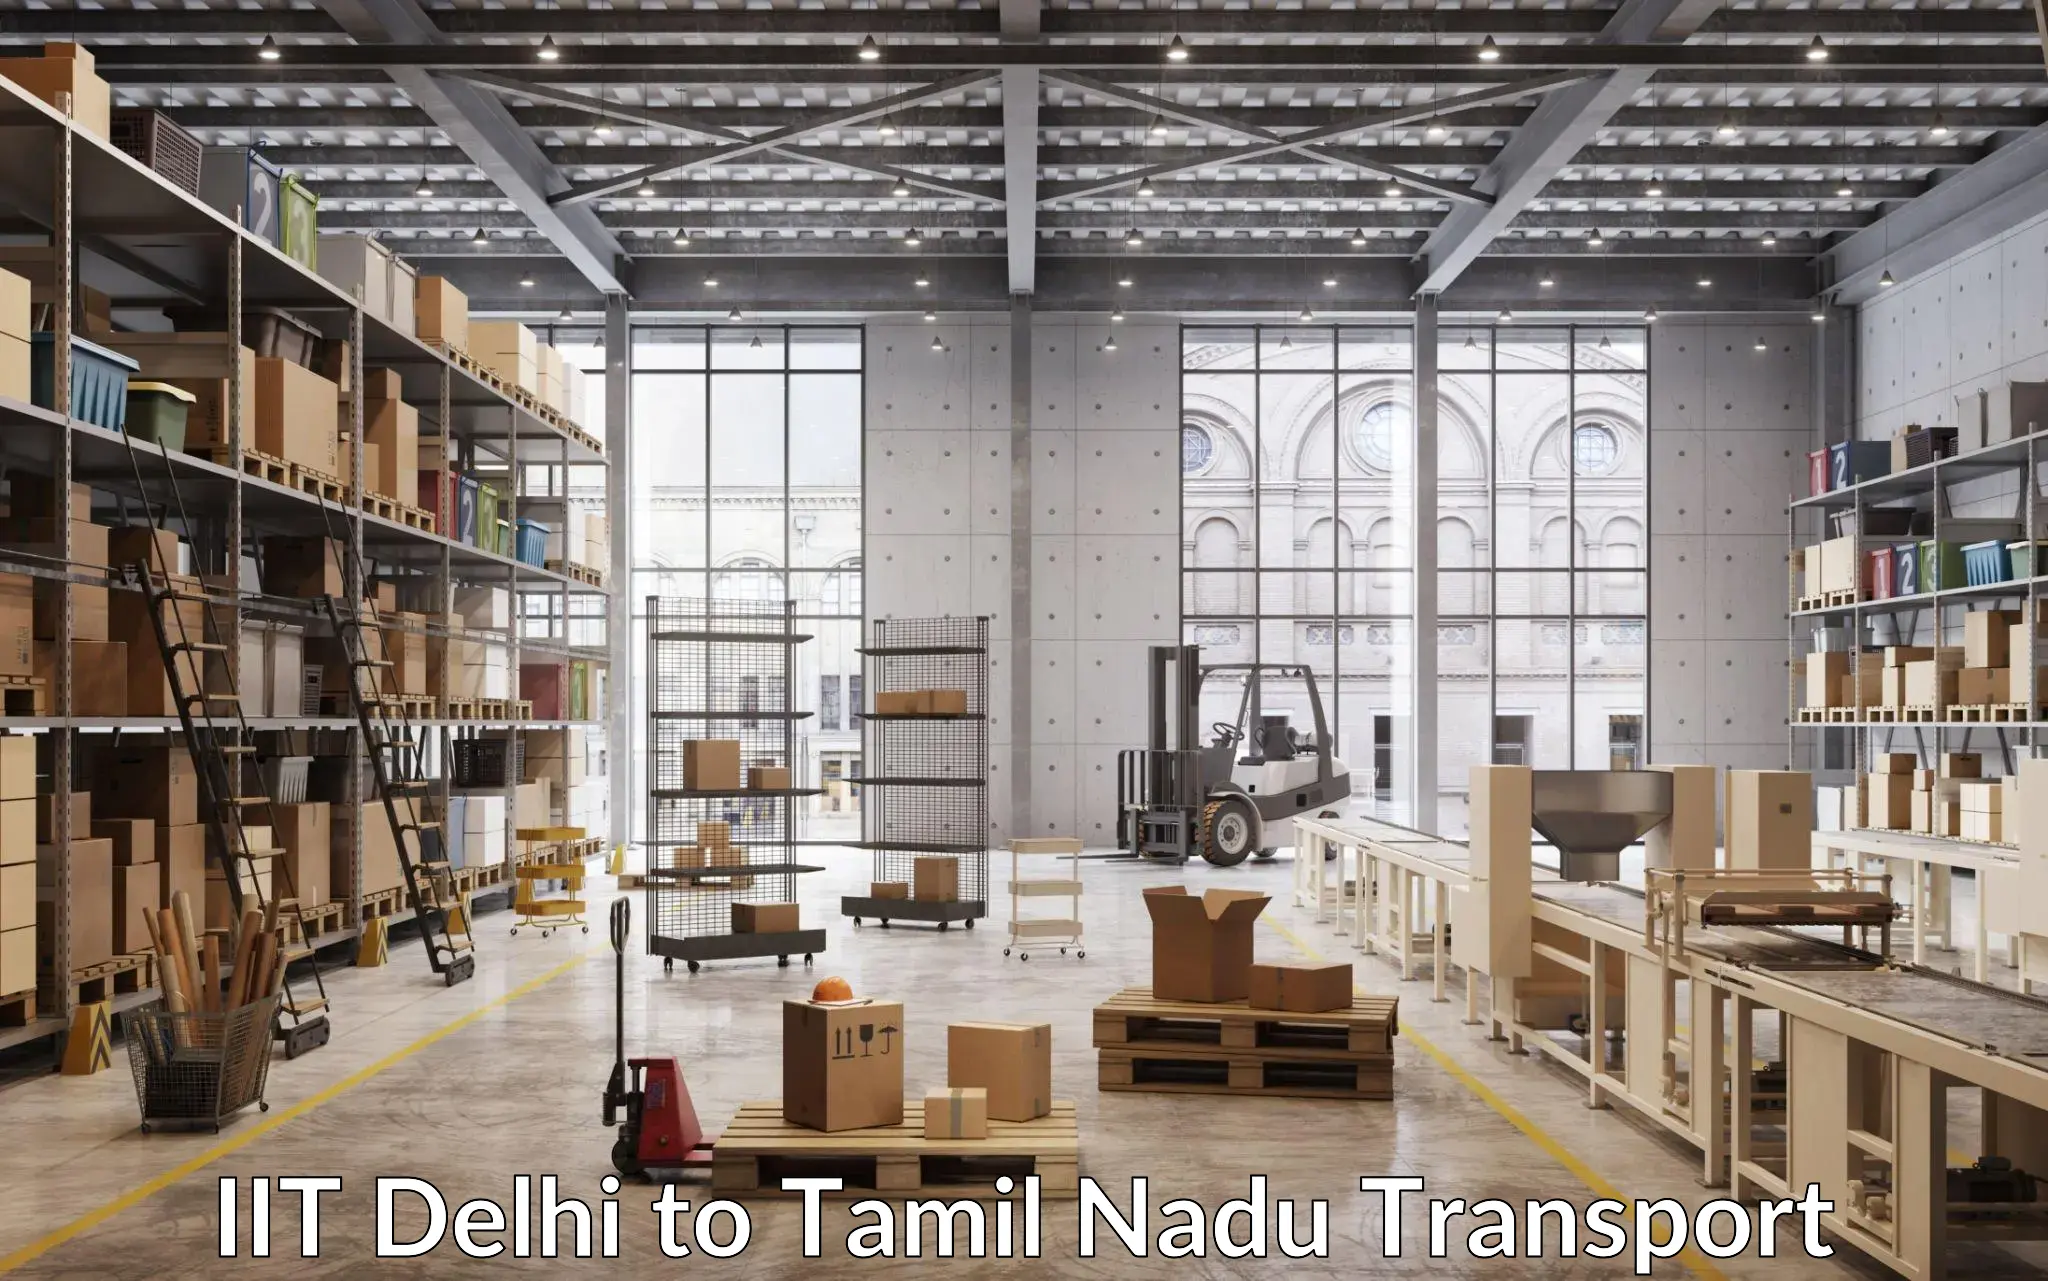 Nearby transport service IIT Delhi to Meenakshi Academy of Higher Education and Research Chennai